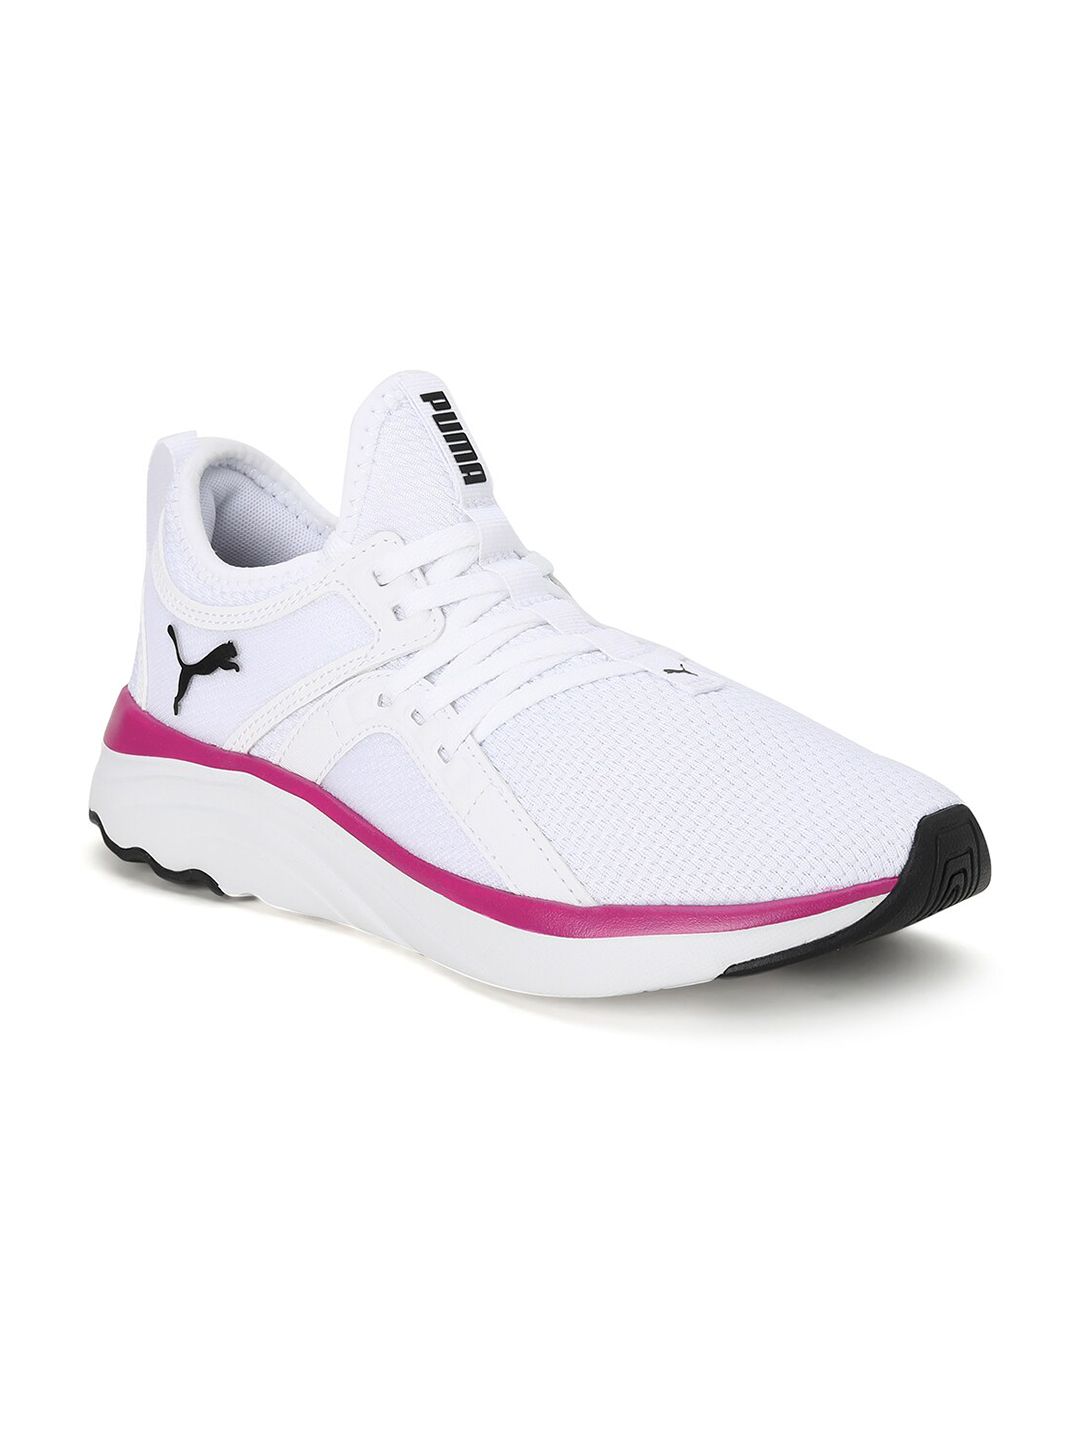 Puma Women White Sports Shoes Price in India